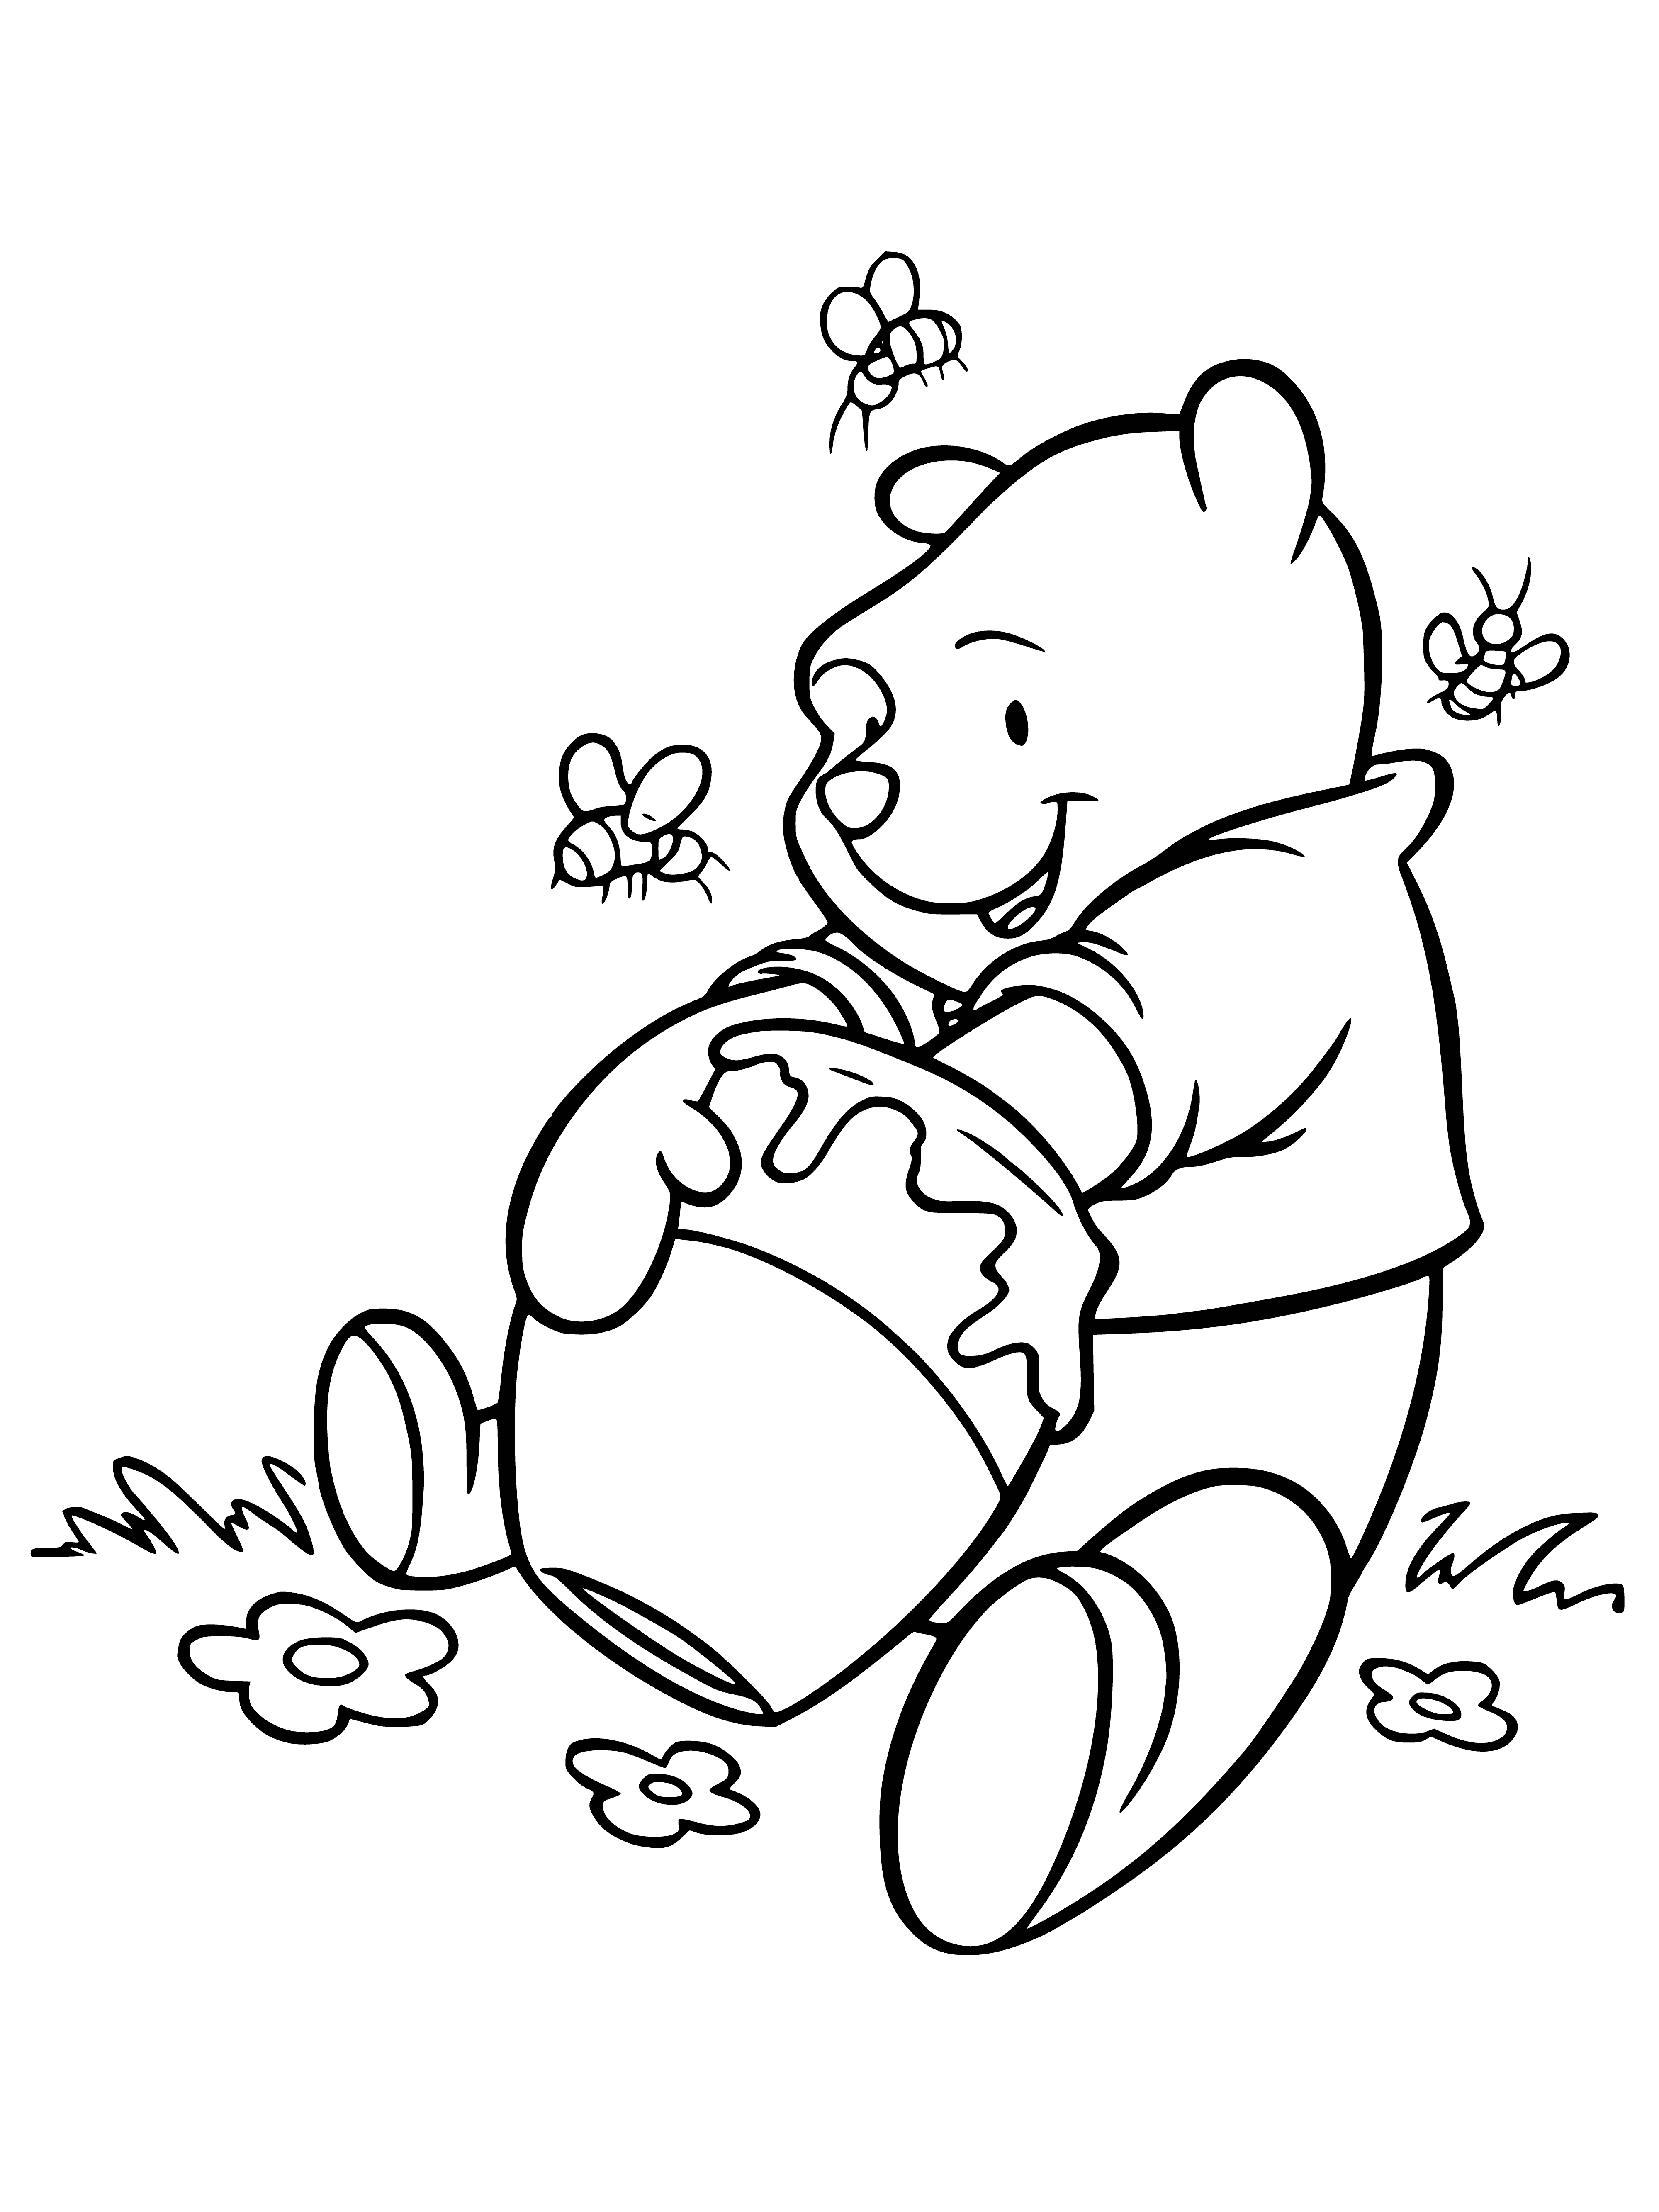 coloring page: Winnie the Pooh has his head in a pot of honey, smiling with joy.